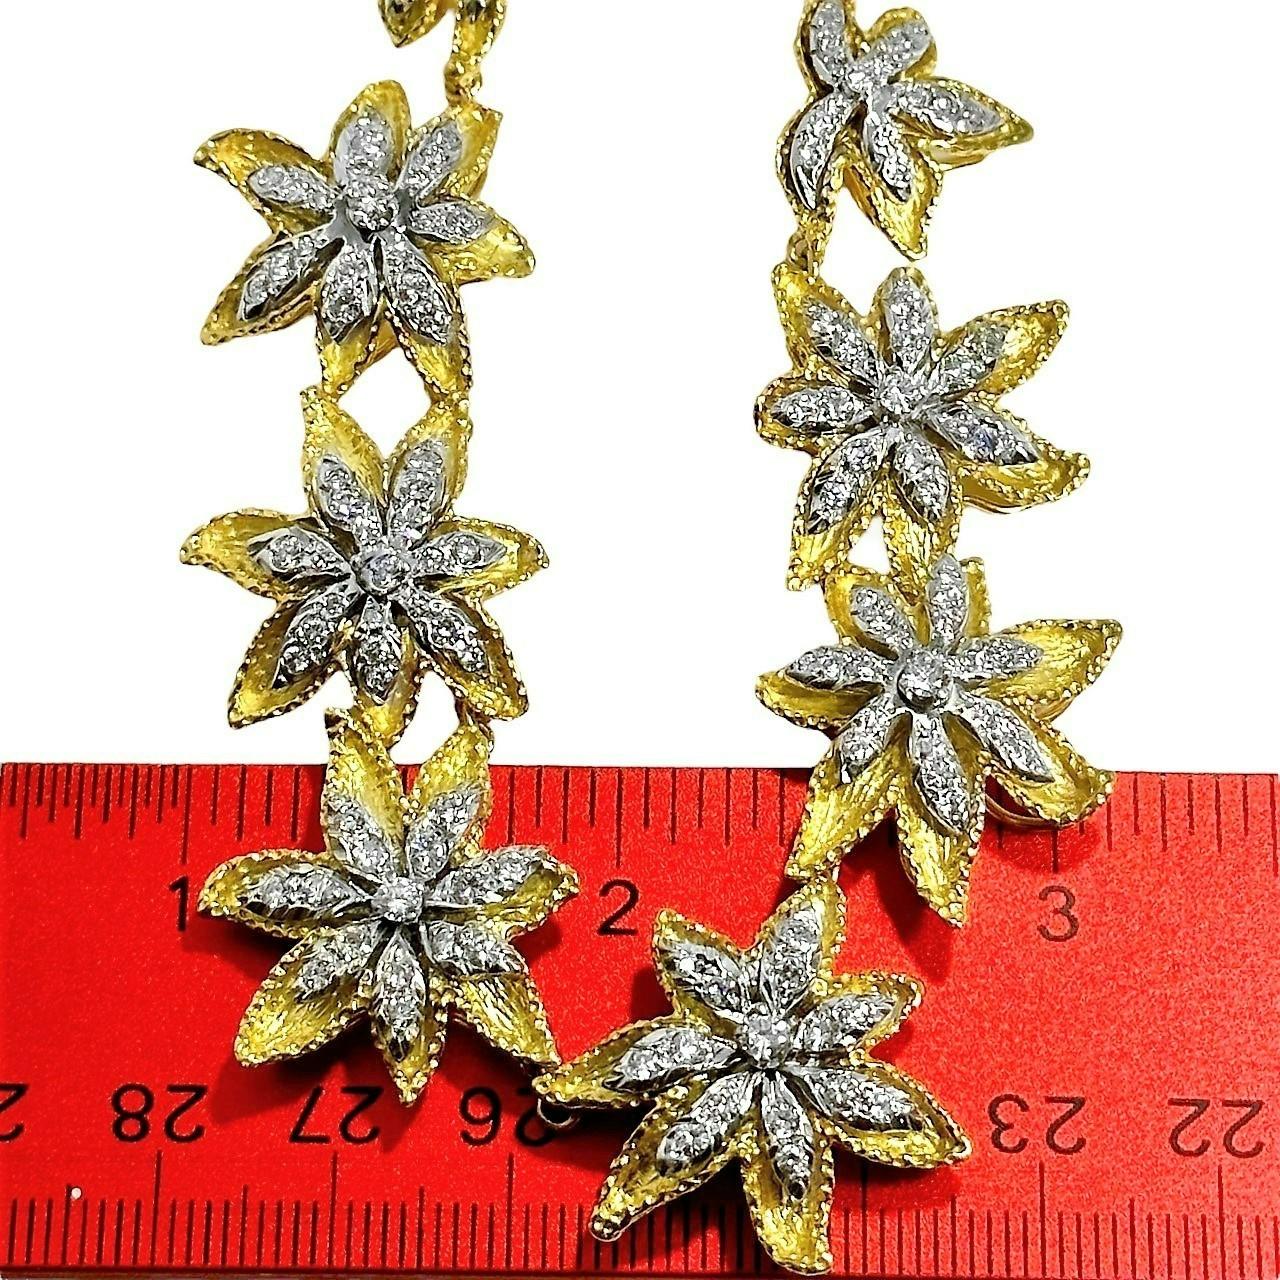 Vintage 18k Yellow Gold Floral Motif Necklace with Diamonds 4